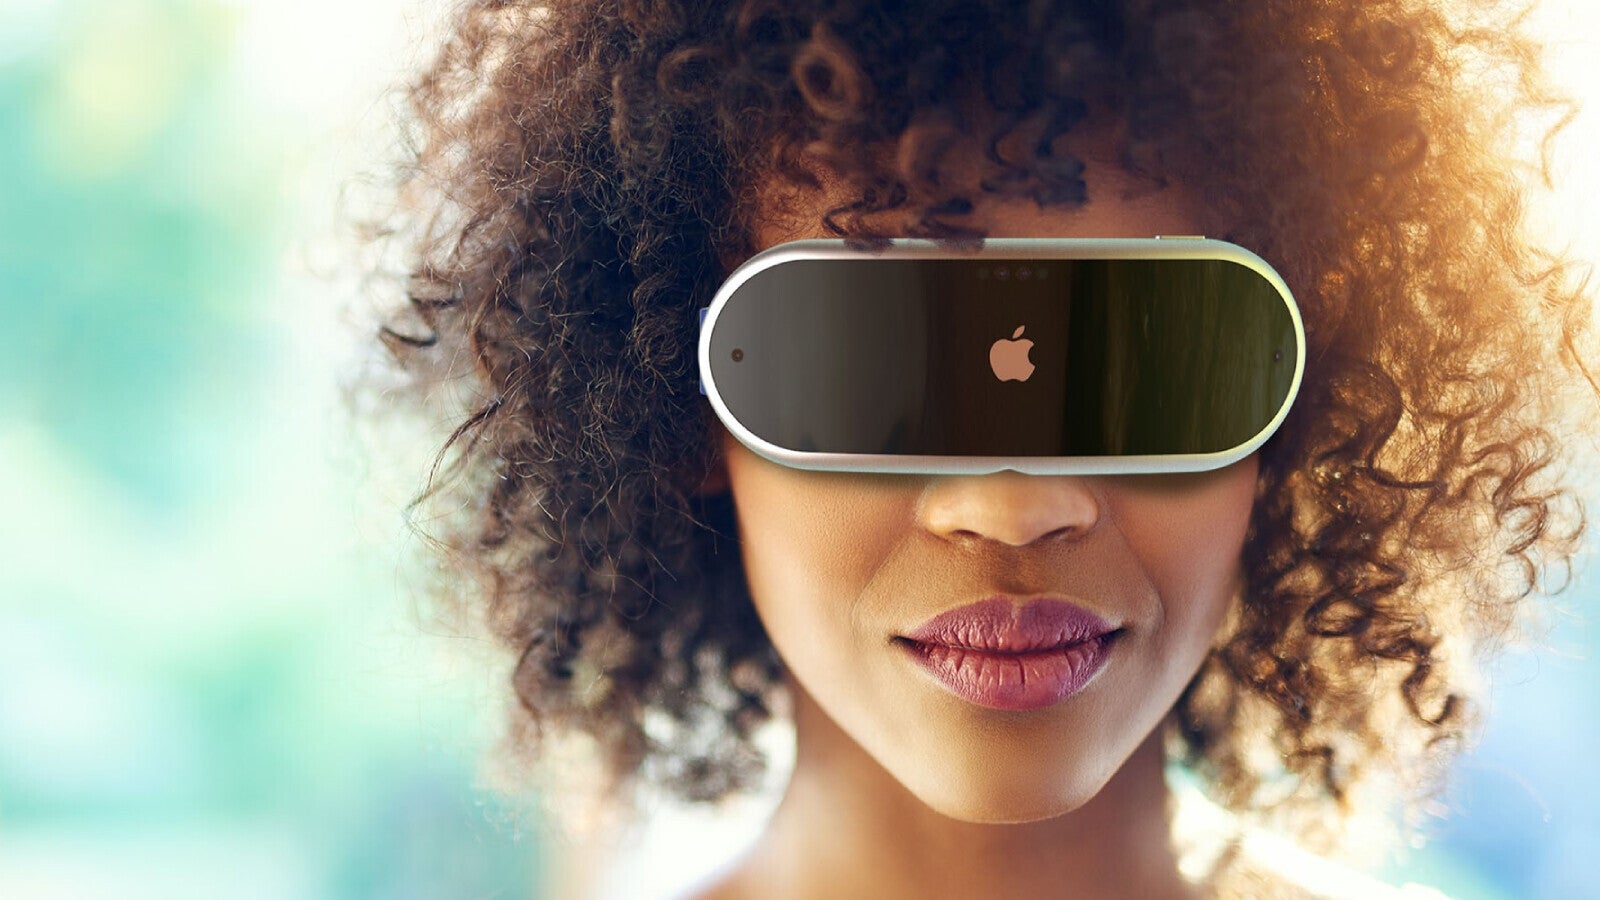 Speculated design for the Apple headset - Apple AR/VR headset: news, rumors, expectations